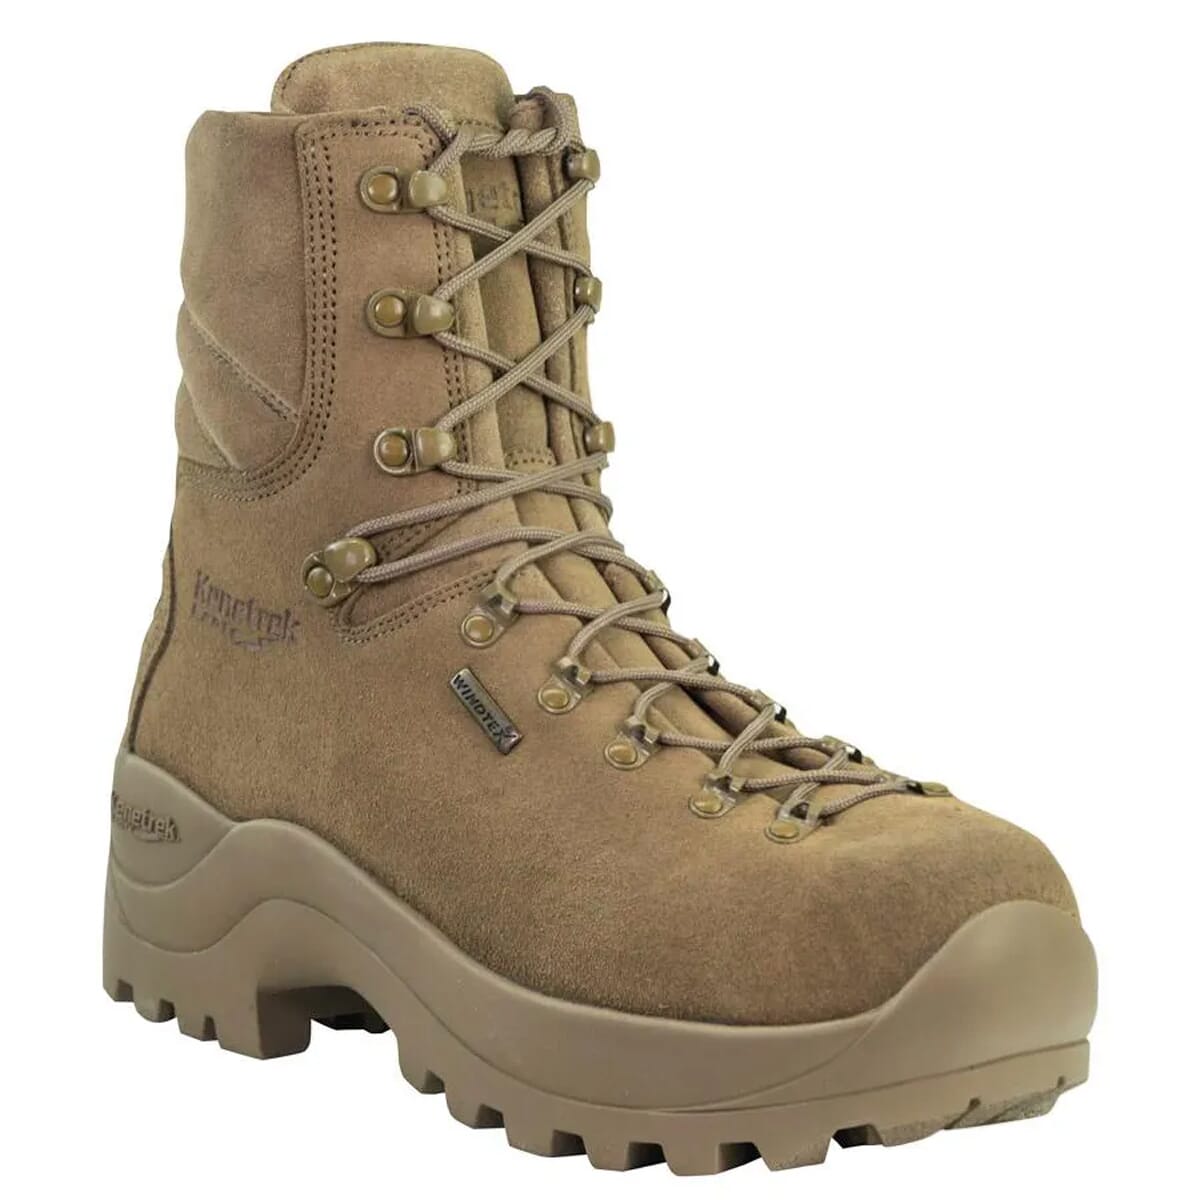 Kenetrek Leather Personnel Carrier Non-Insulated Coyote Brown 9.5M Work Boots KE-430-NI-9.5M